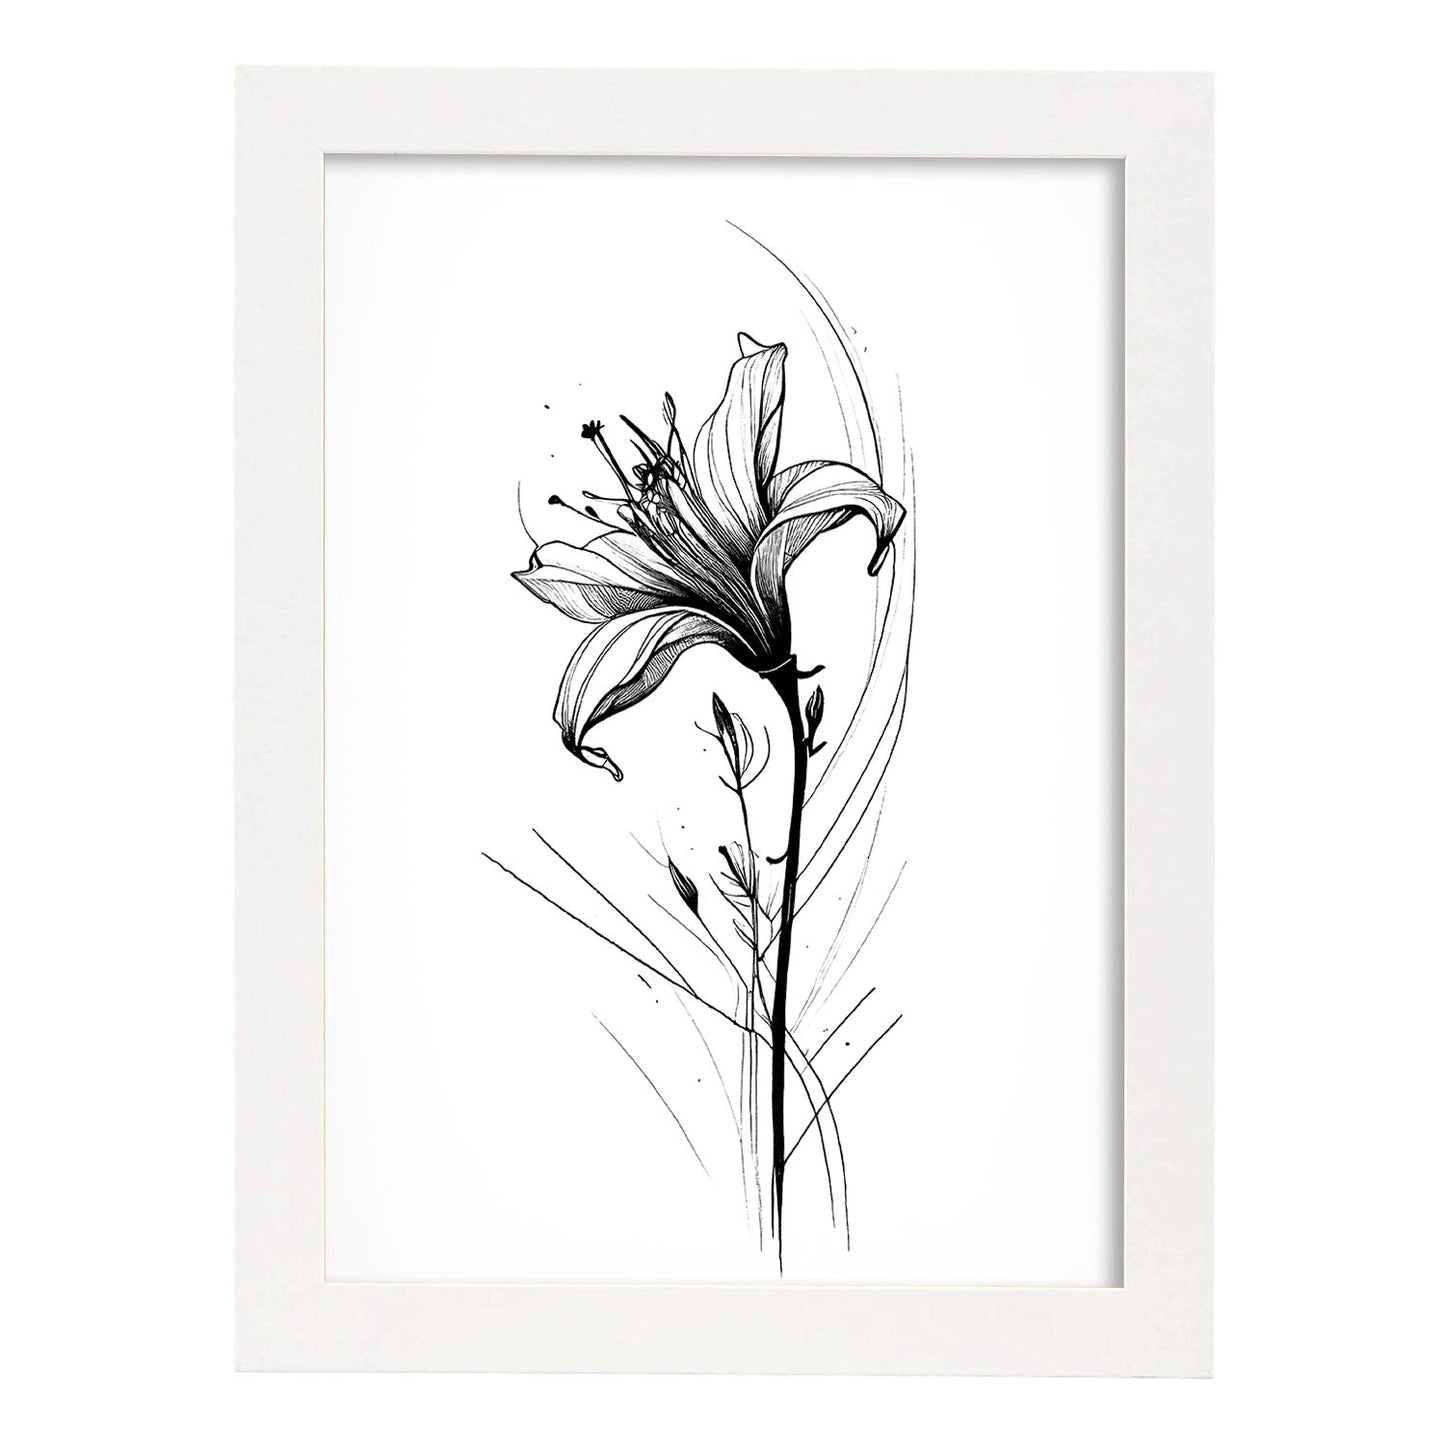 Nacnic Lily Minimalist Line Art_3. Aesthetic Wall Art Prints for Bedroom or Living Room Design.